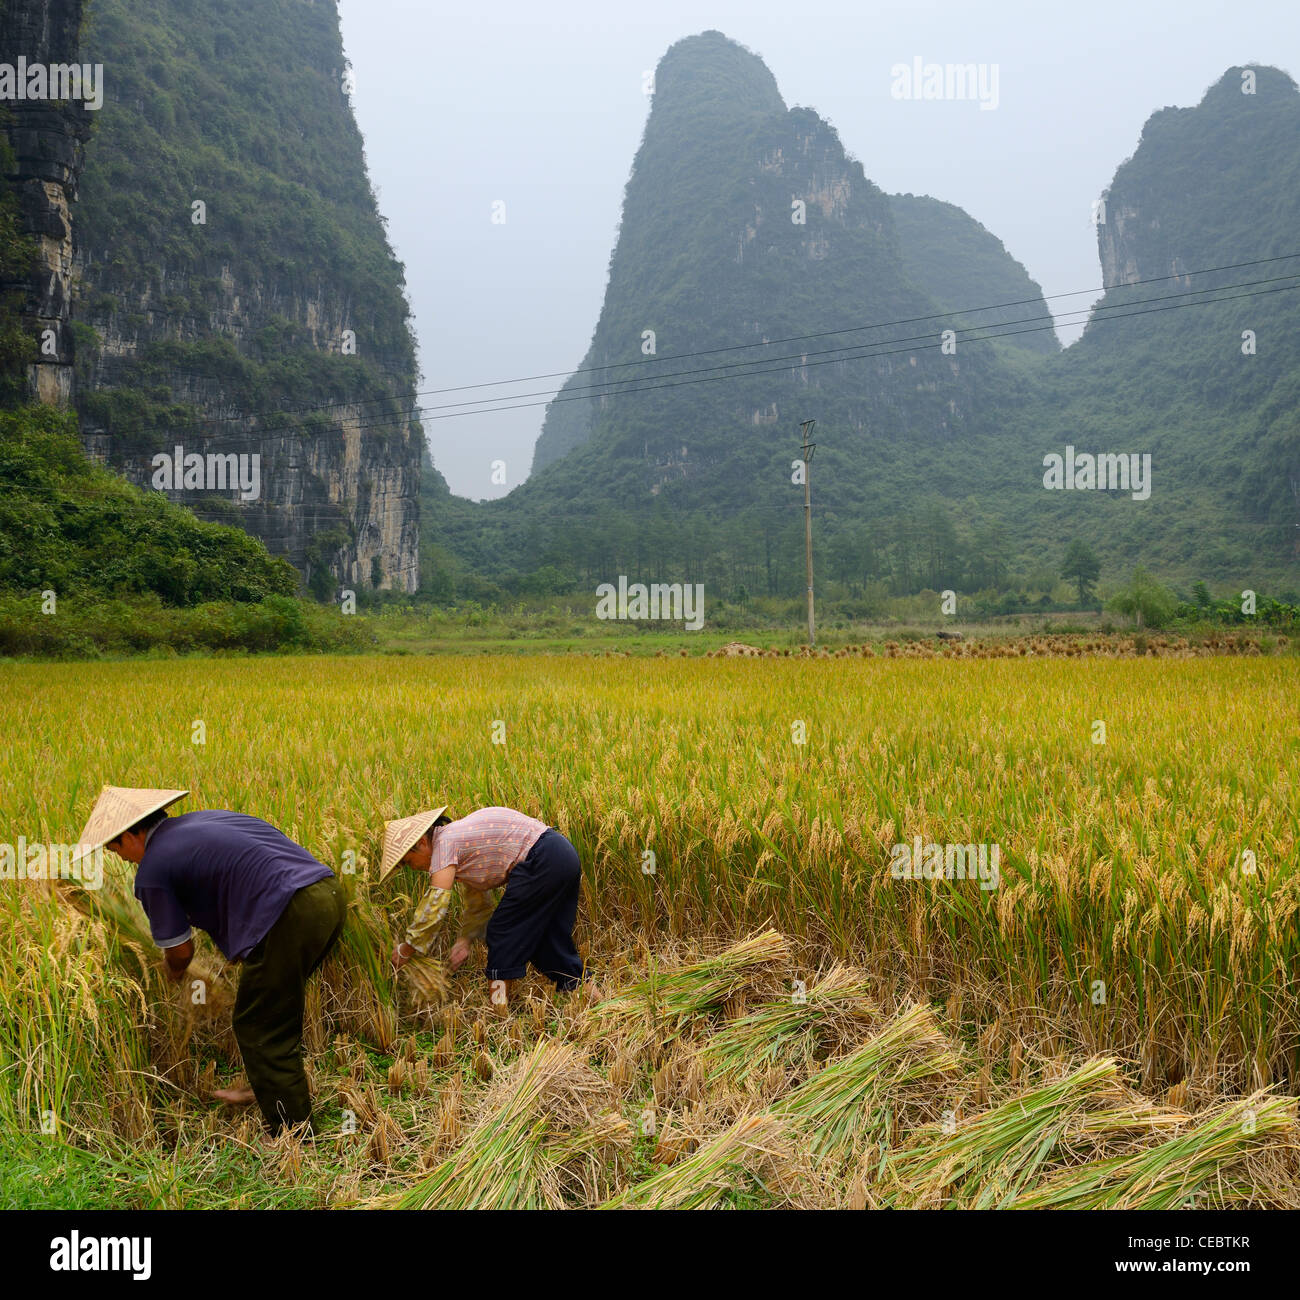 Husband and wife bent over harvesting rice with hand sickle and Karst limestone peaks near Yangshuo Peoples Republic of China Stock Photo